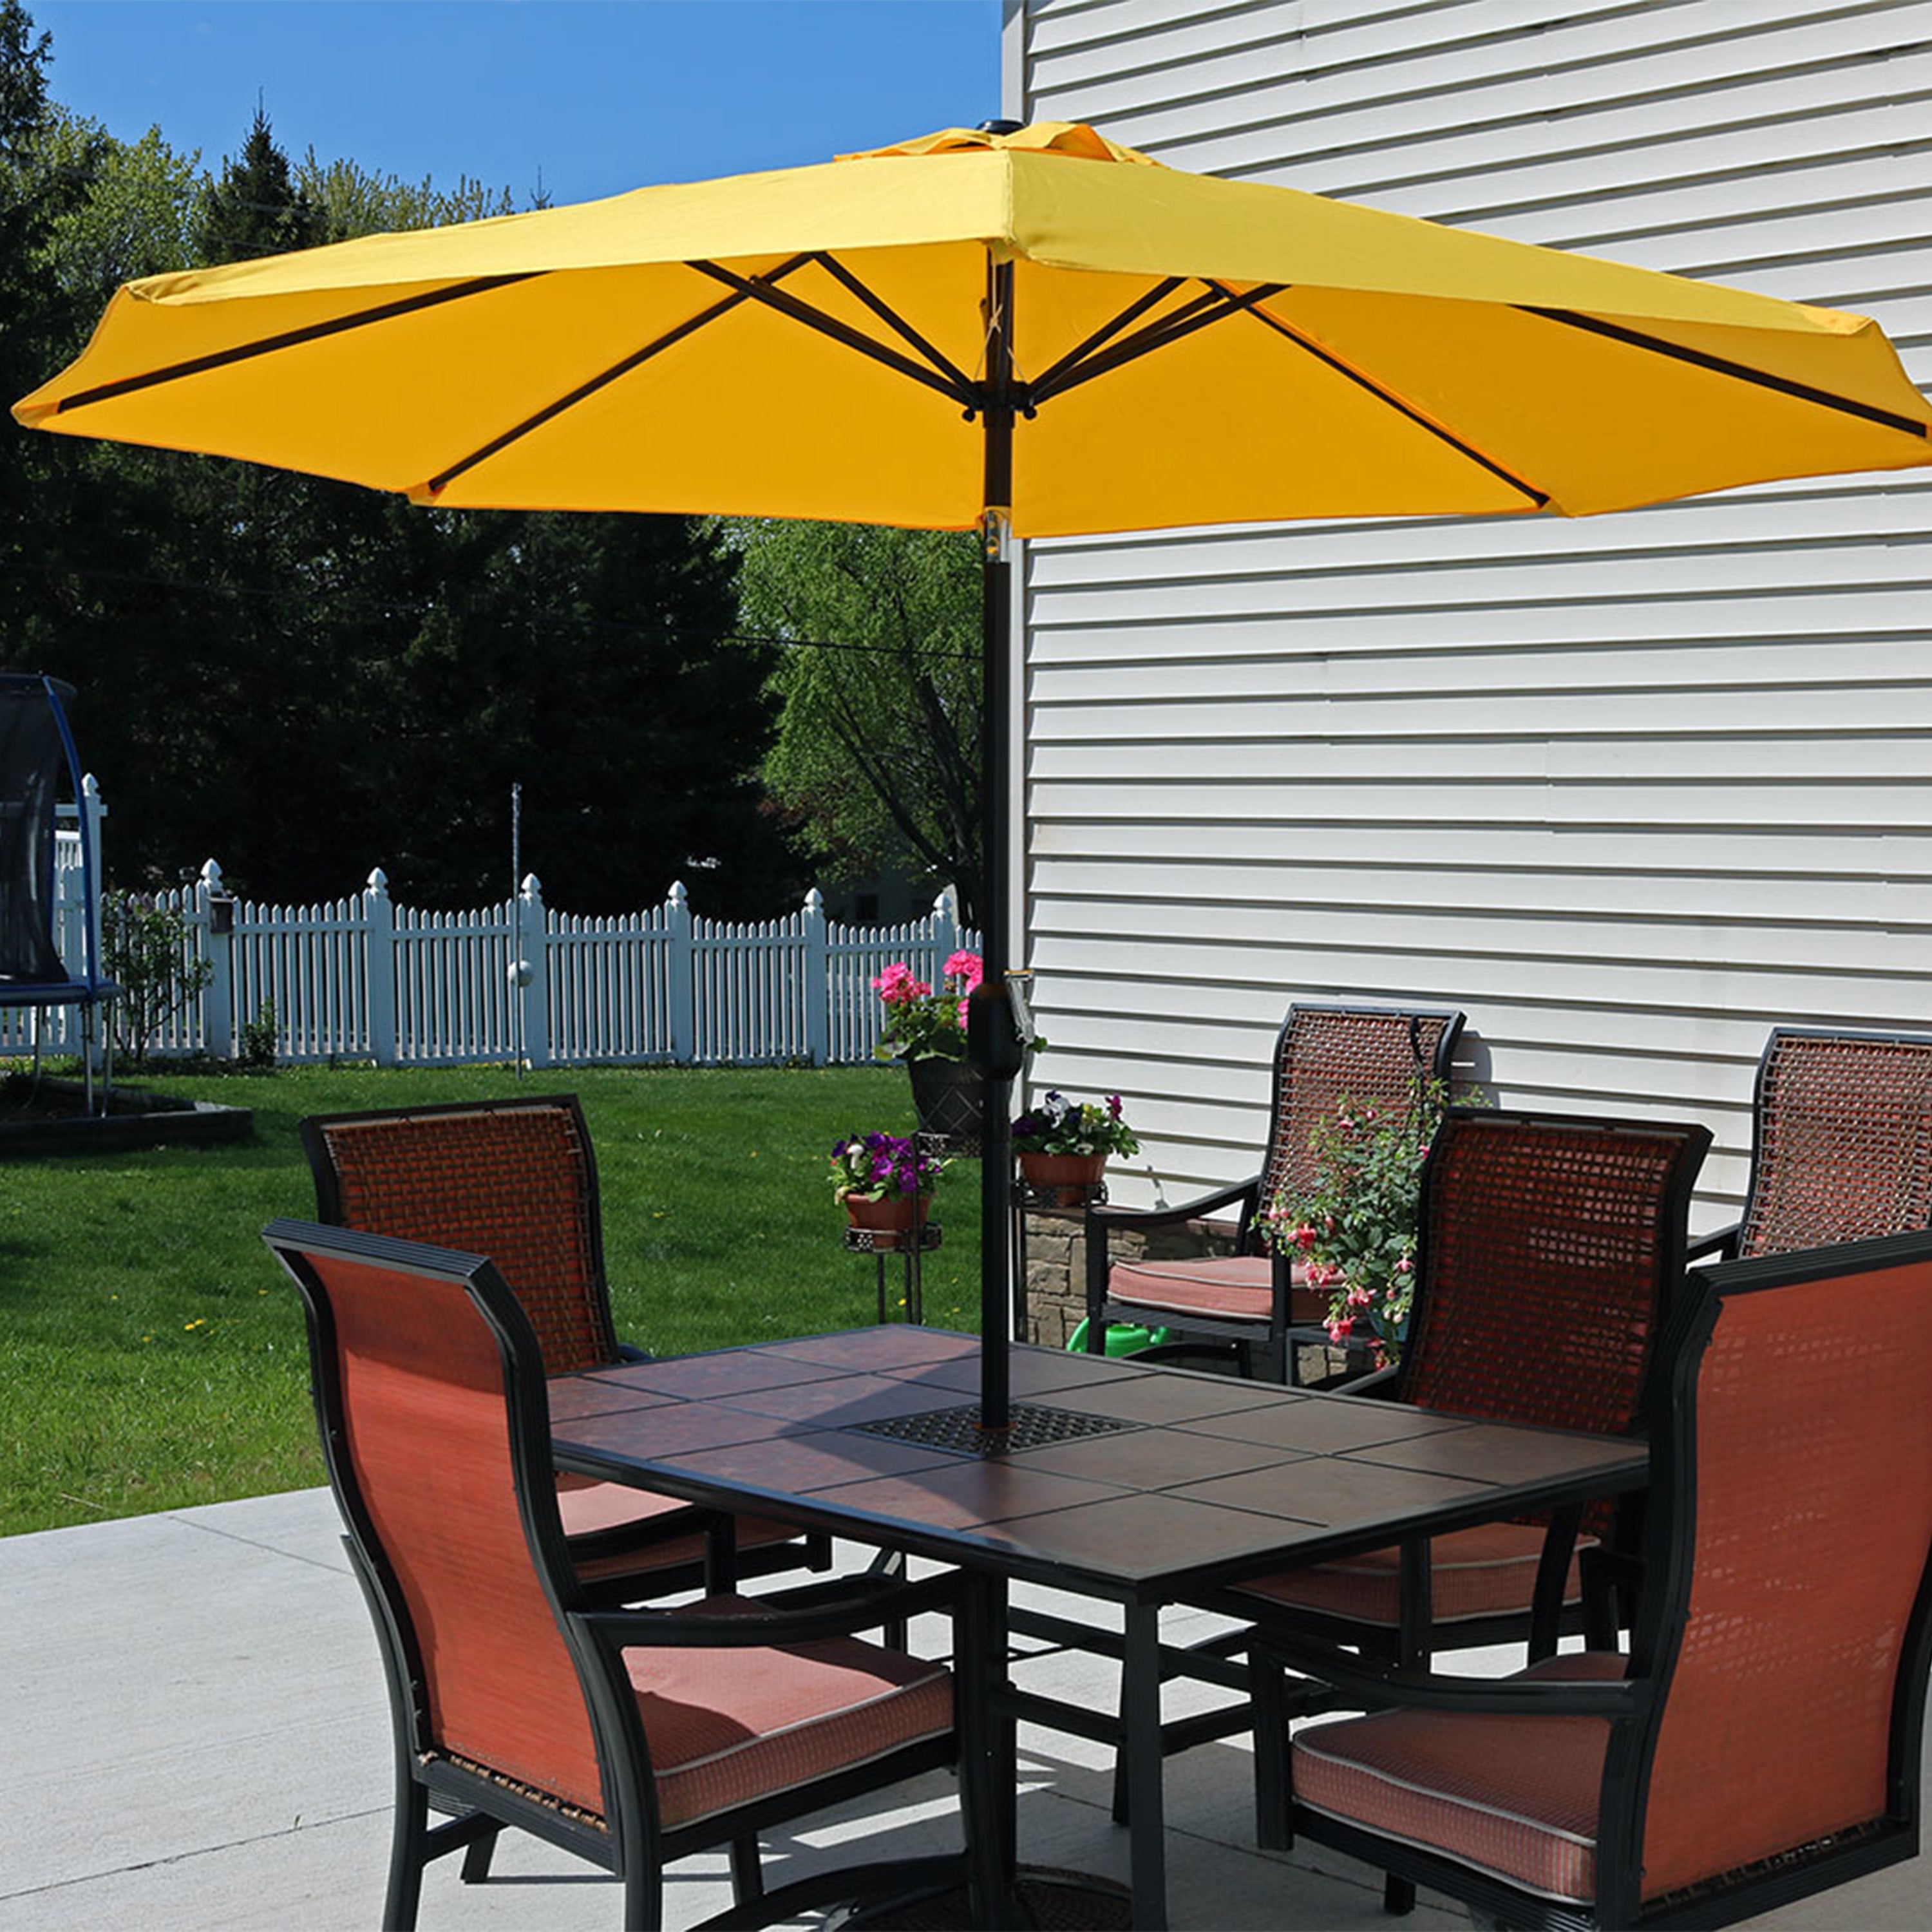 Sunnydaze Outdoor Aluminum Patio Table Umbrella with Polyester Canopy and Push Button Tilt and Crank - 9' - Gold